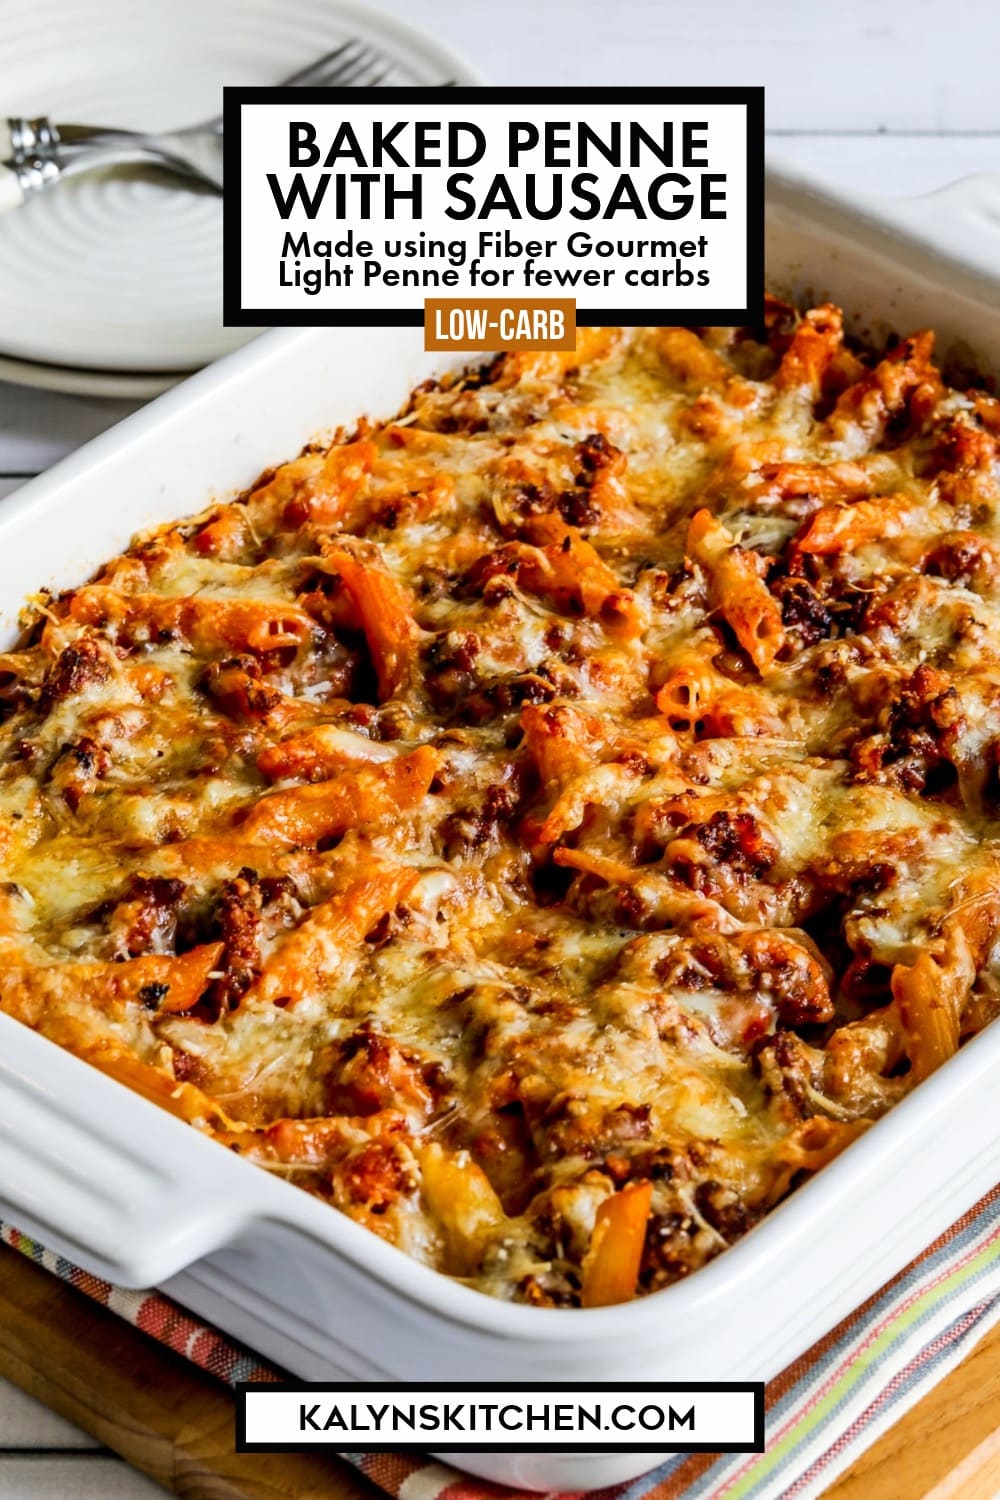 Pinterest image of Baked Penne with Sausage